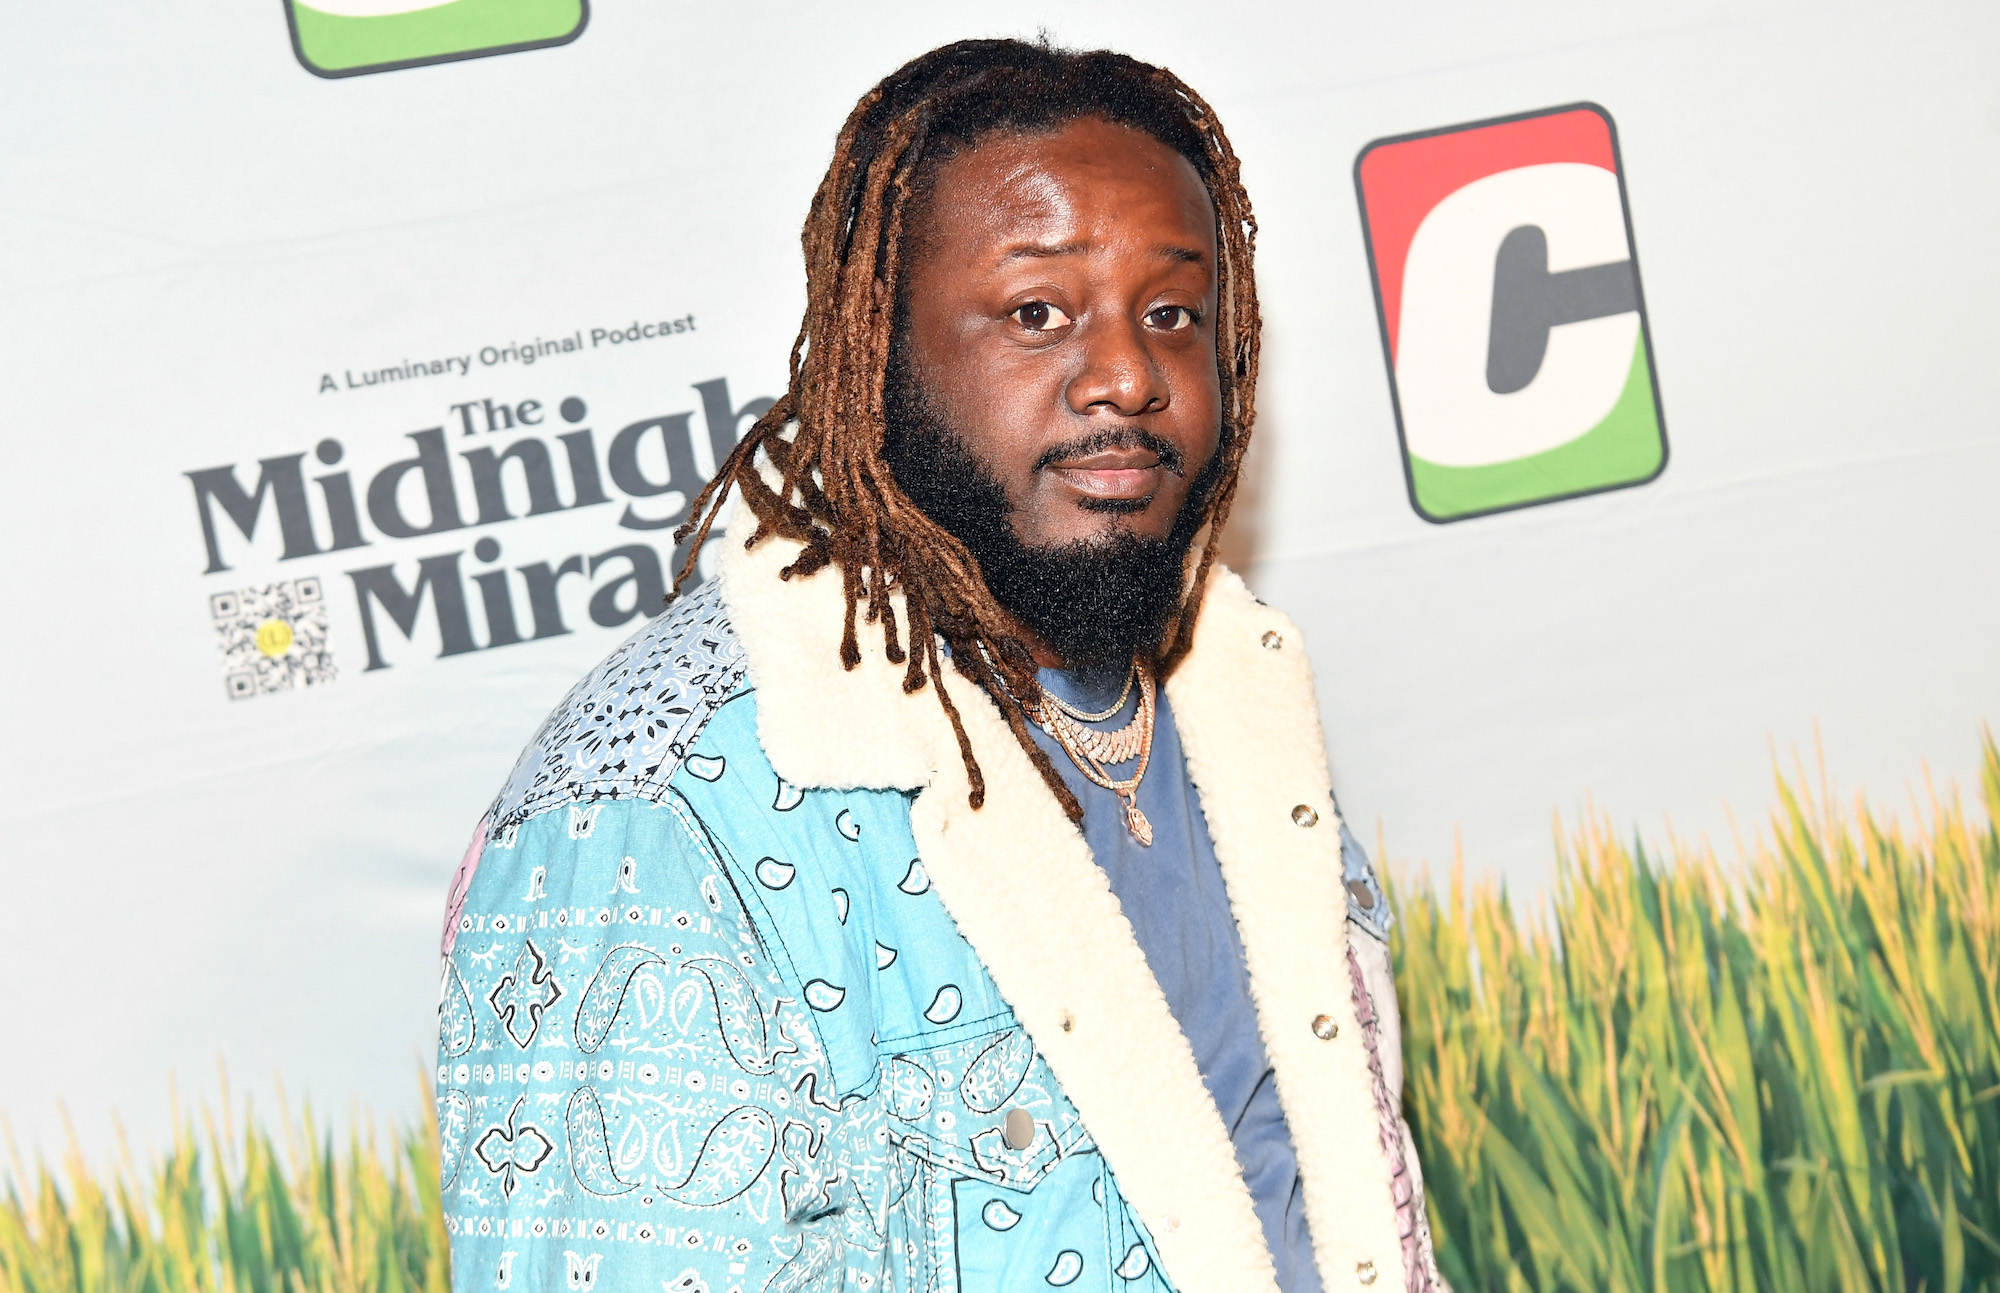 Country writer. T-Pain.